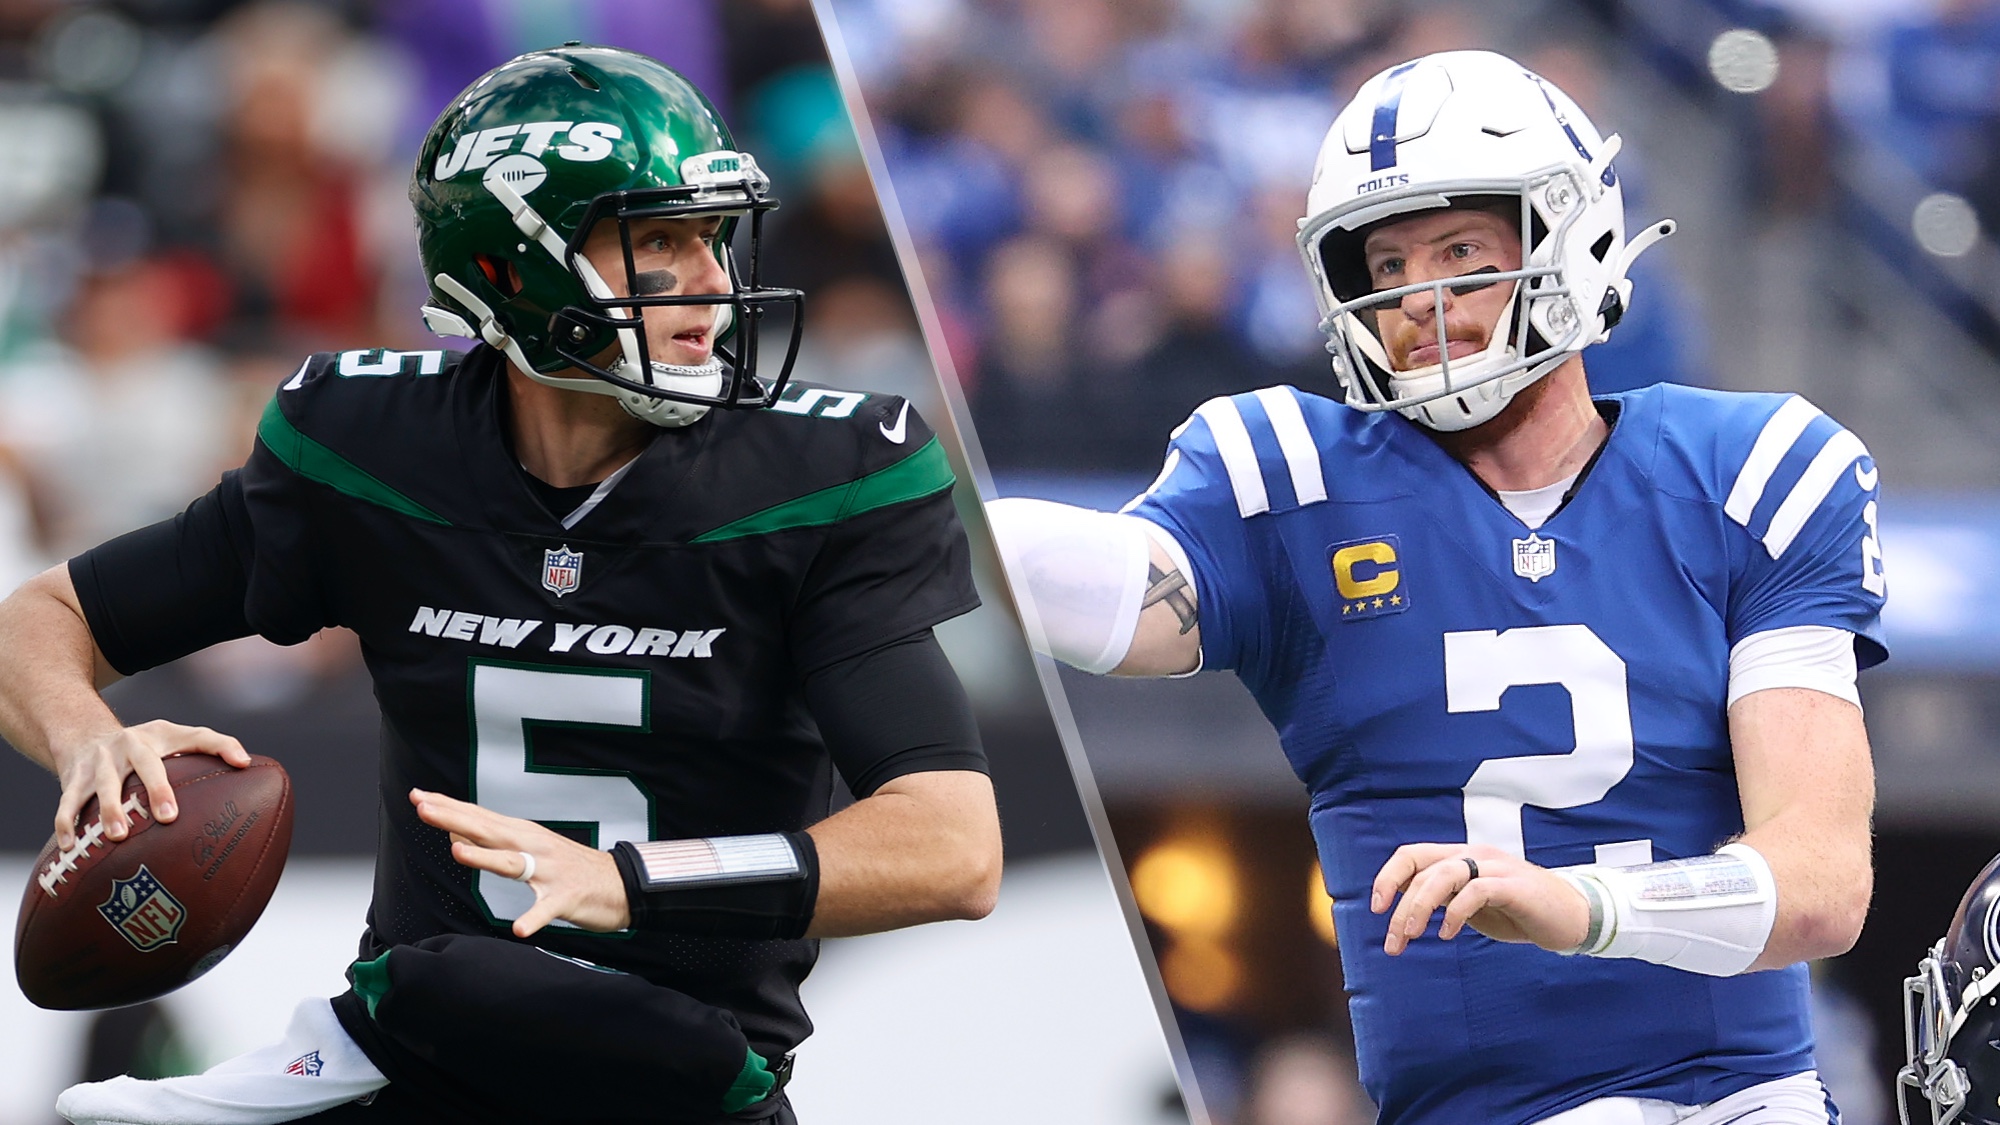 Thursday Night Football Colts vs. Jets - Time and channel